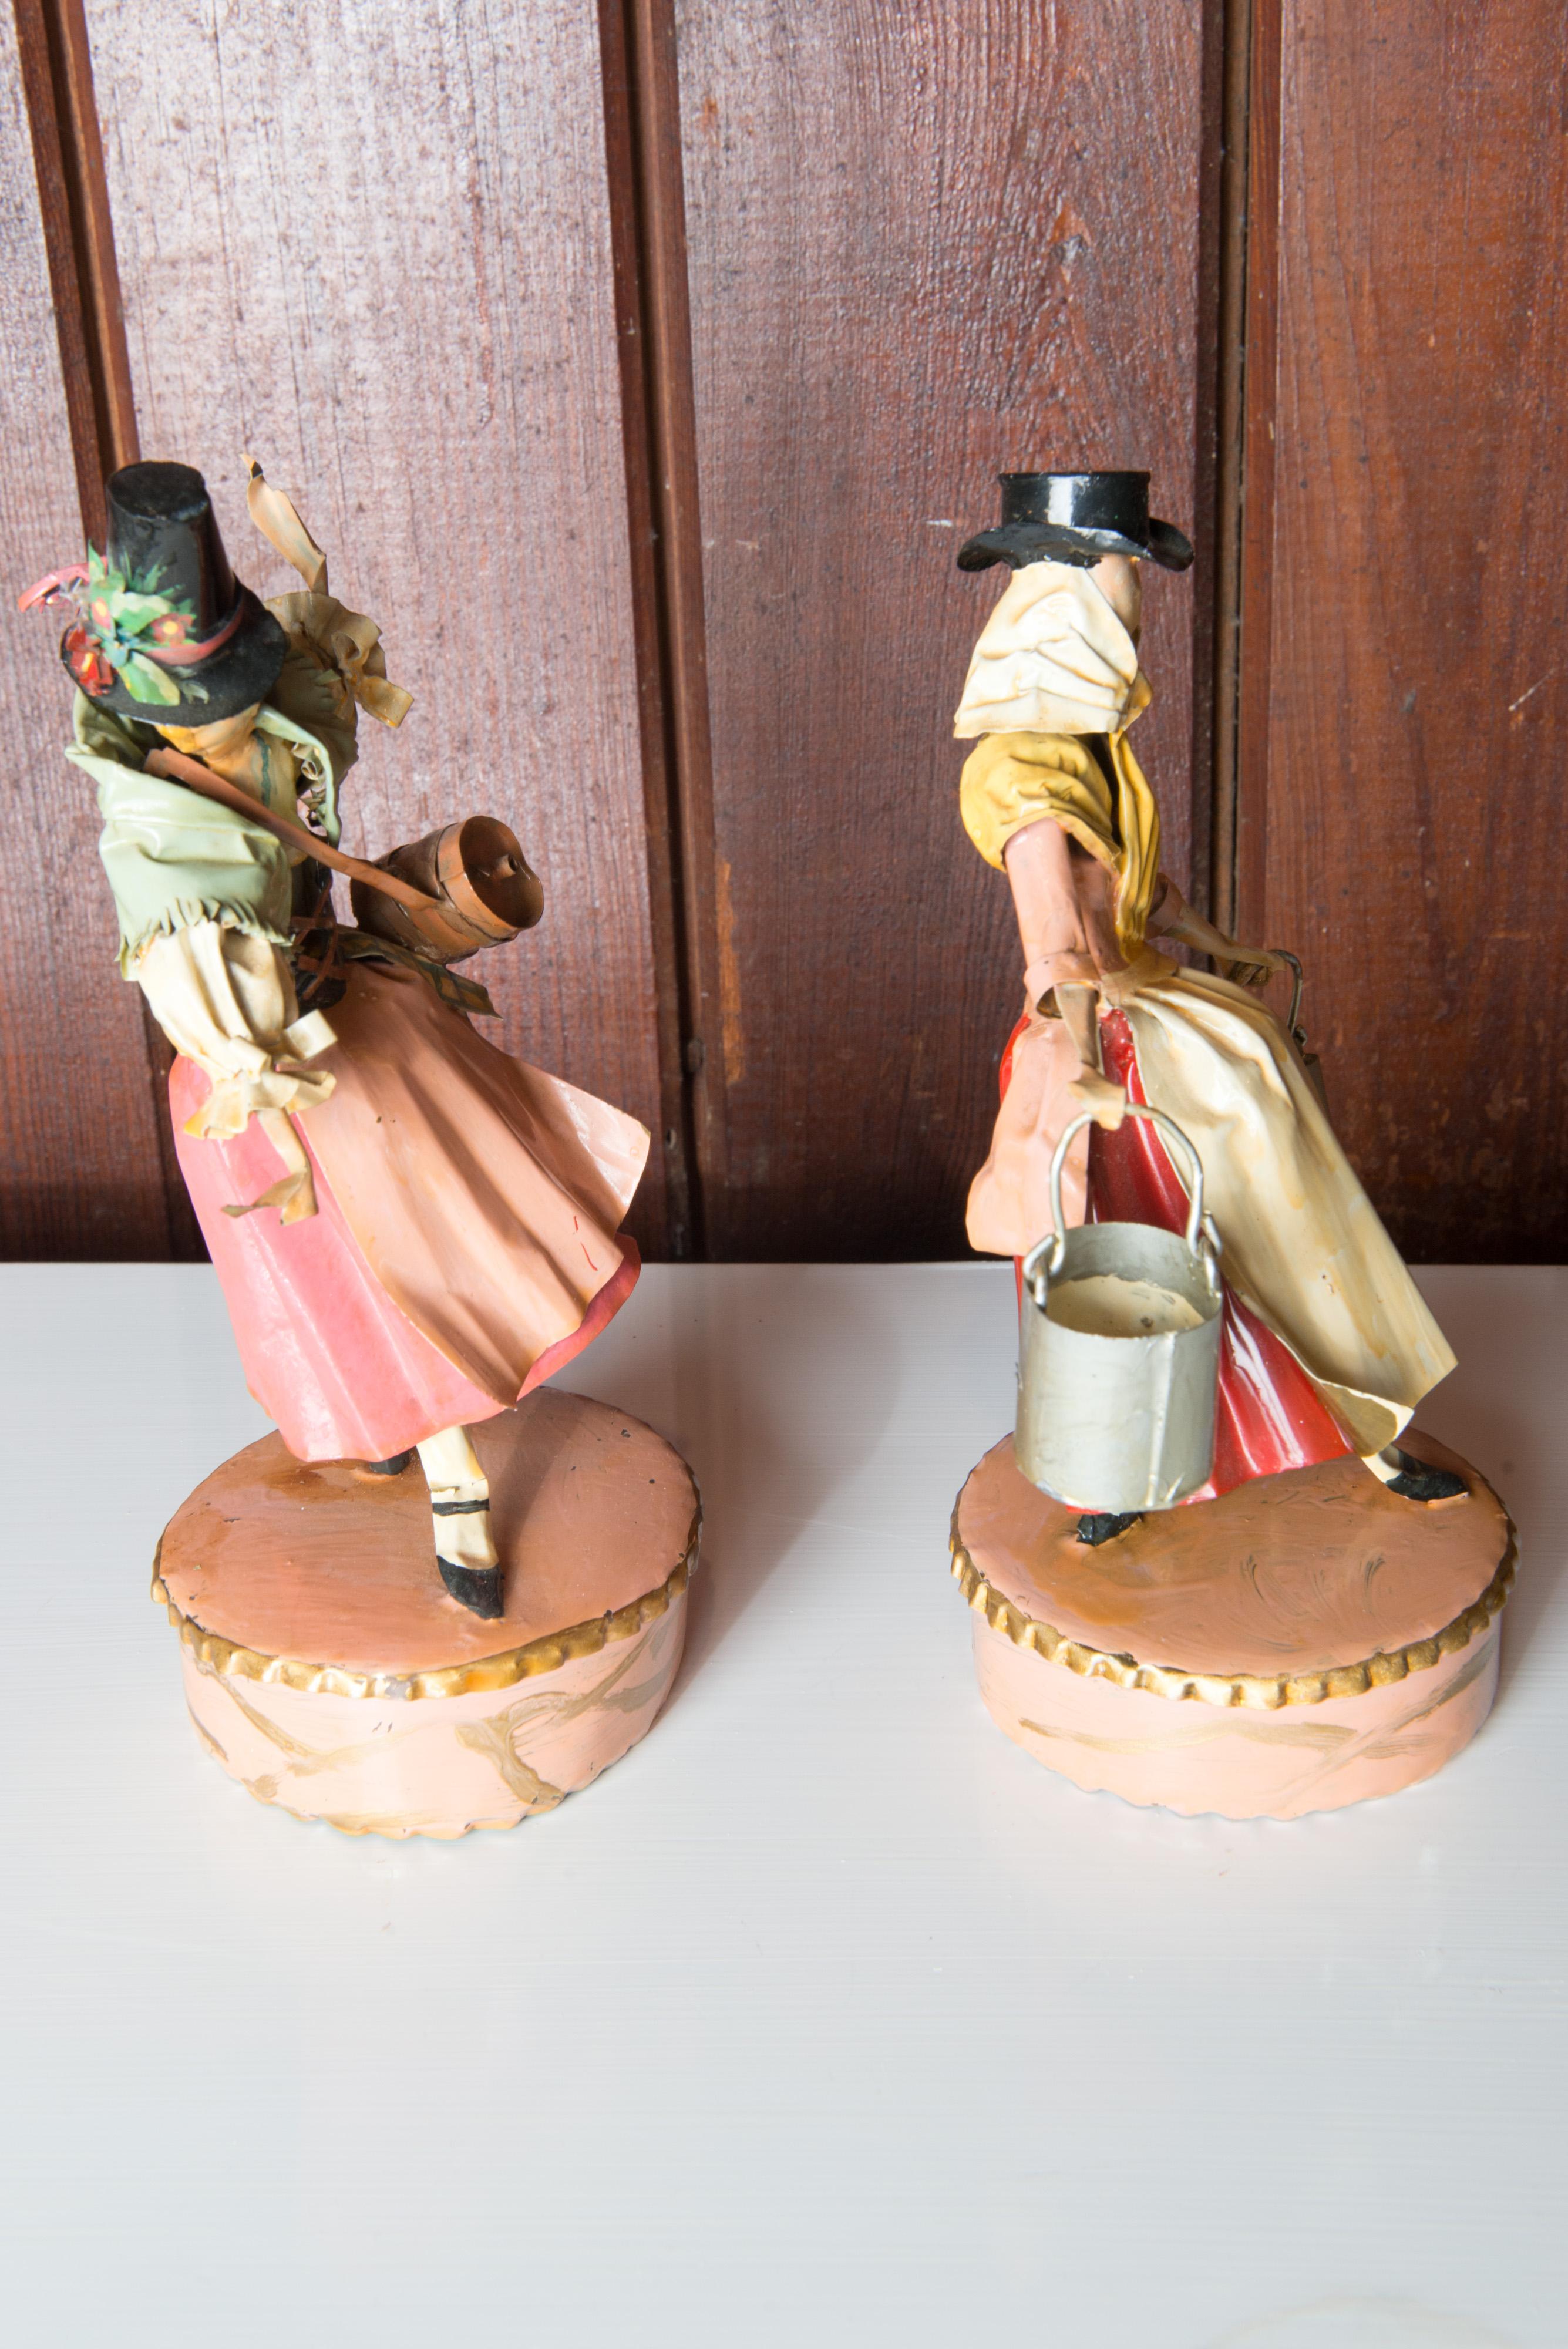 Lee Menichetti, (1931- 1997), New York & Palm Beach, well known mid century artist known for his theatre related art. These sculptures are made of hand bent and hand painted sheet brass. An Austrian Tyrolean maid with a tall hat and a brandy keg. A